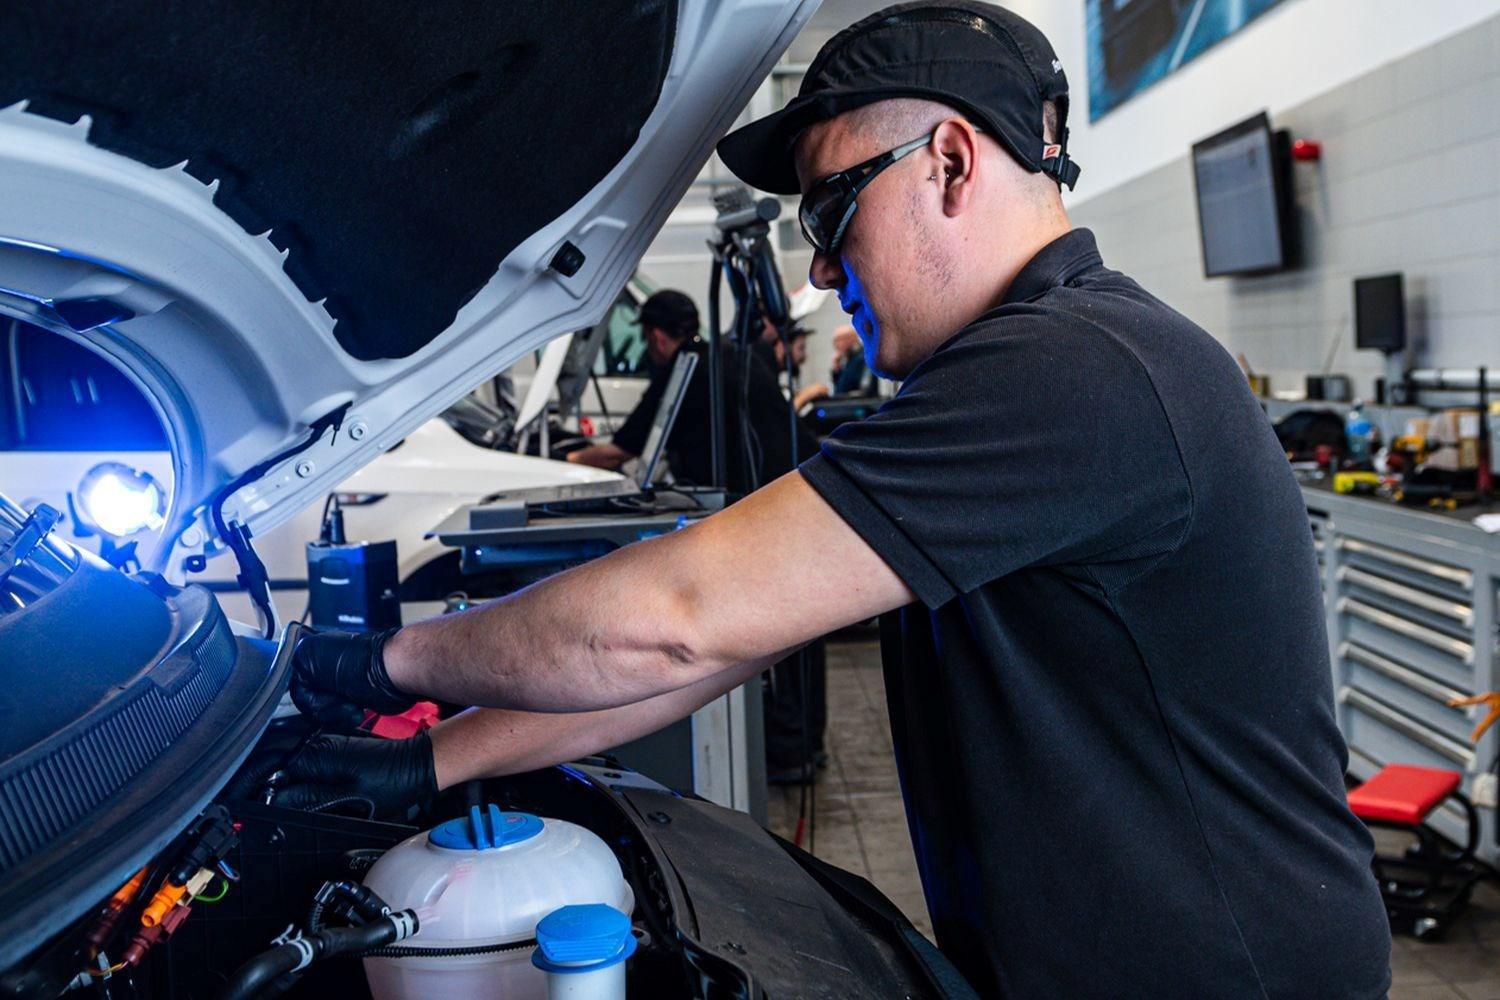 Volkswagen Commercial Vehicle Technician carrying out maintenance work